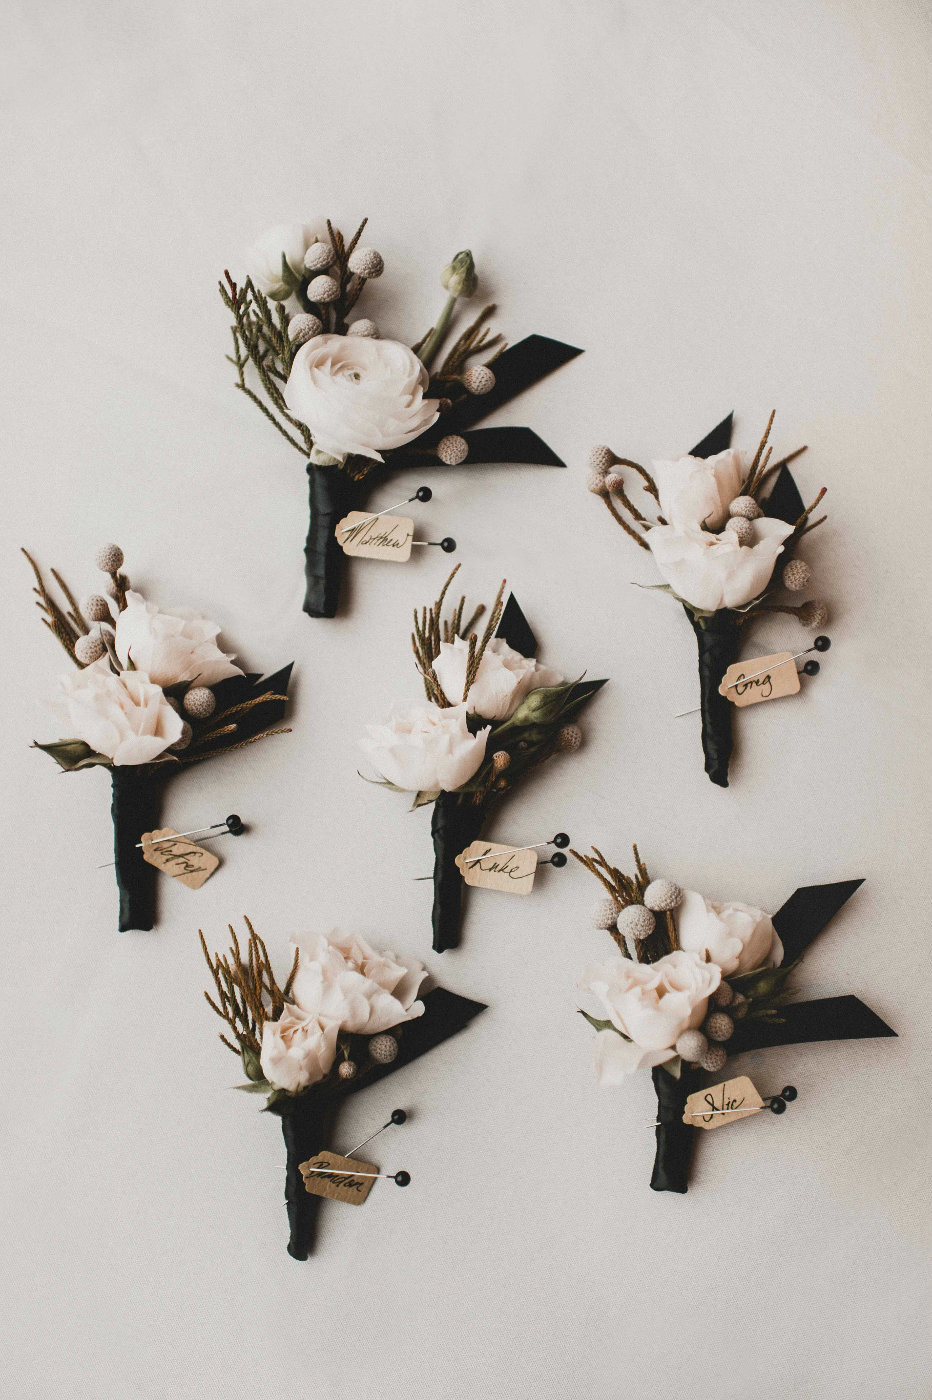 Wedding party boutonnieres white spray roses and silver brunia wrapped in black ribbon.